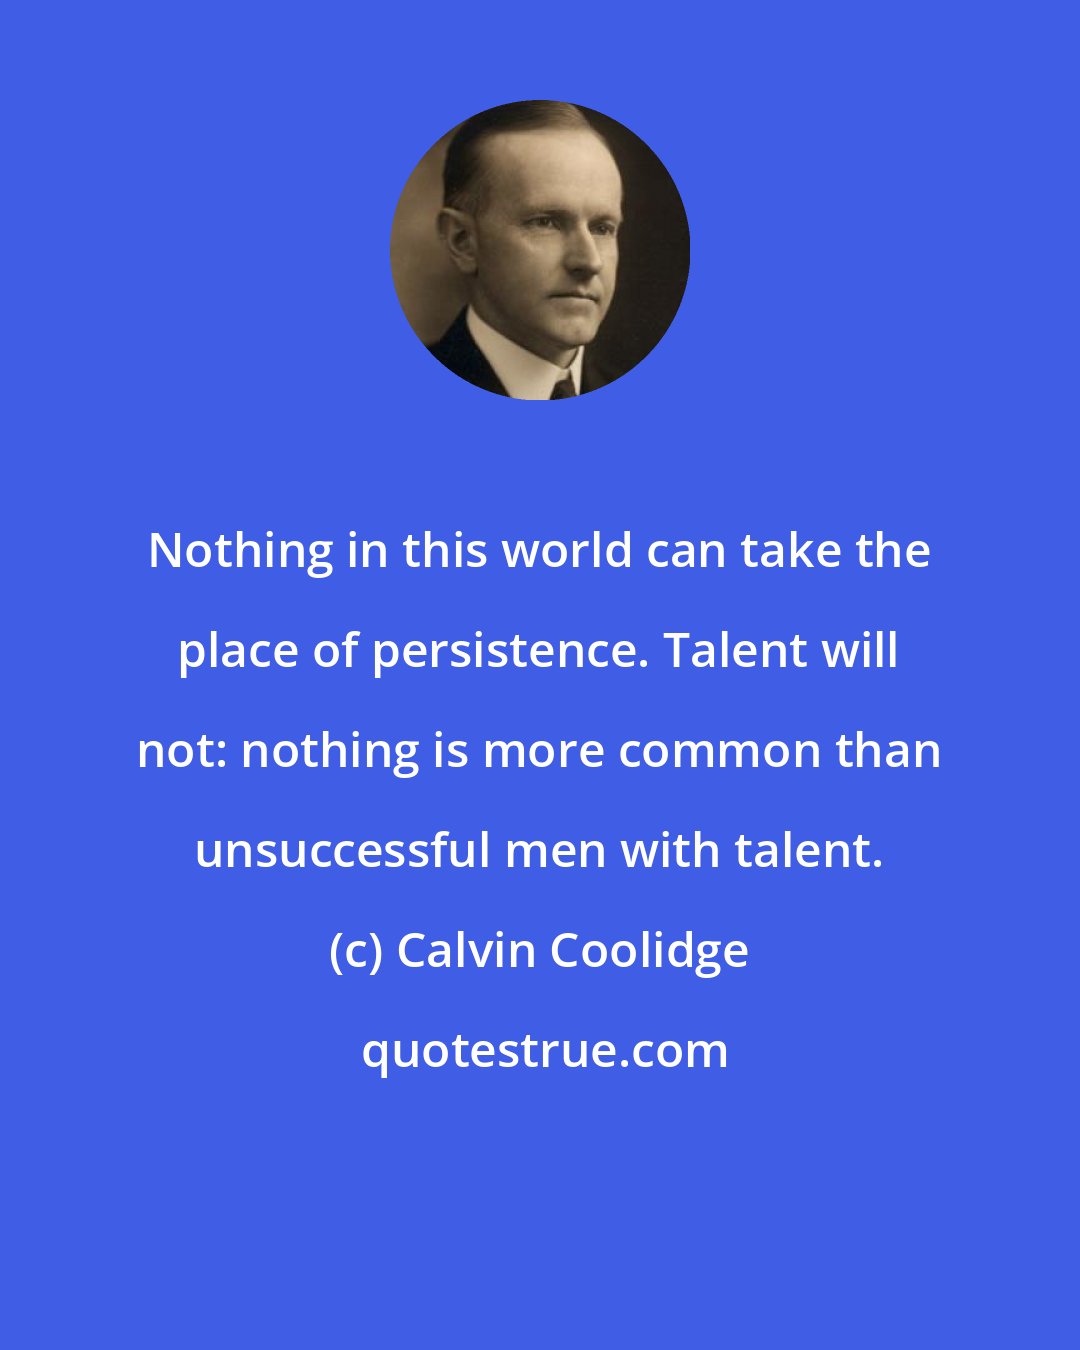 Calvin Coolidge: Nothing in this world can take the place of persistence. Talent will not: nothing is more common than unsuccessful men with talent.